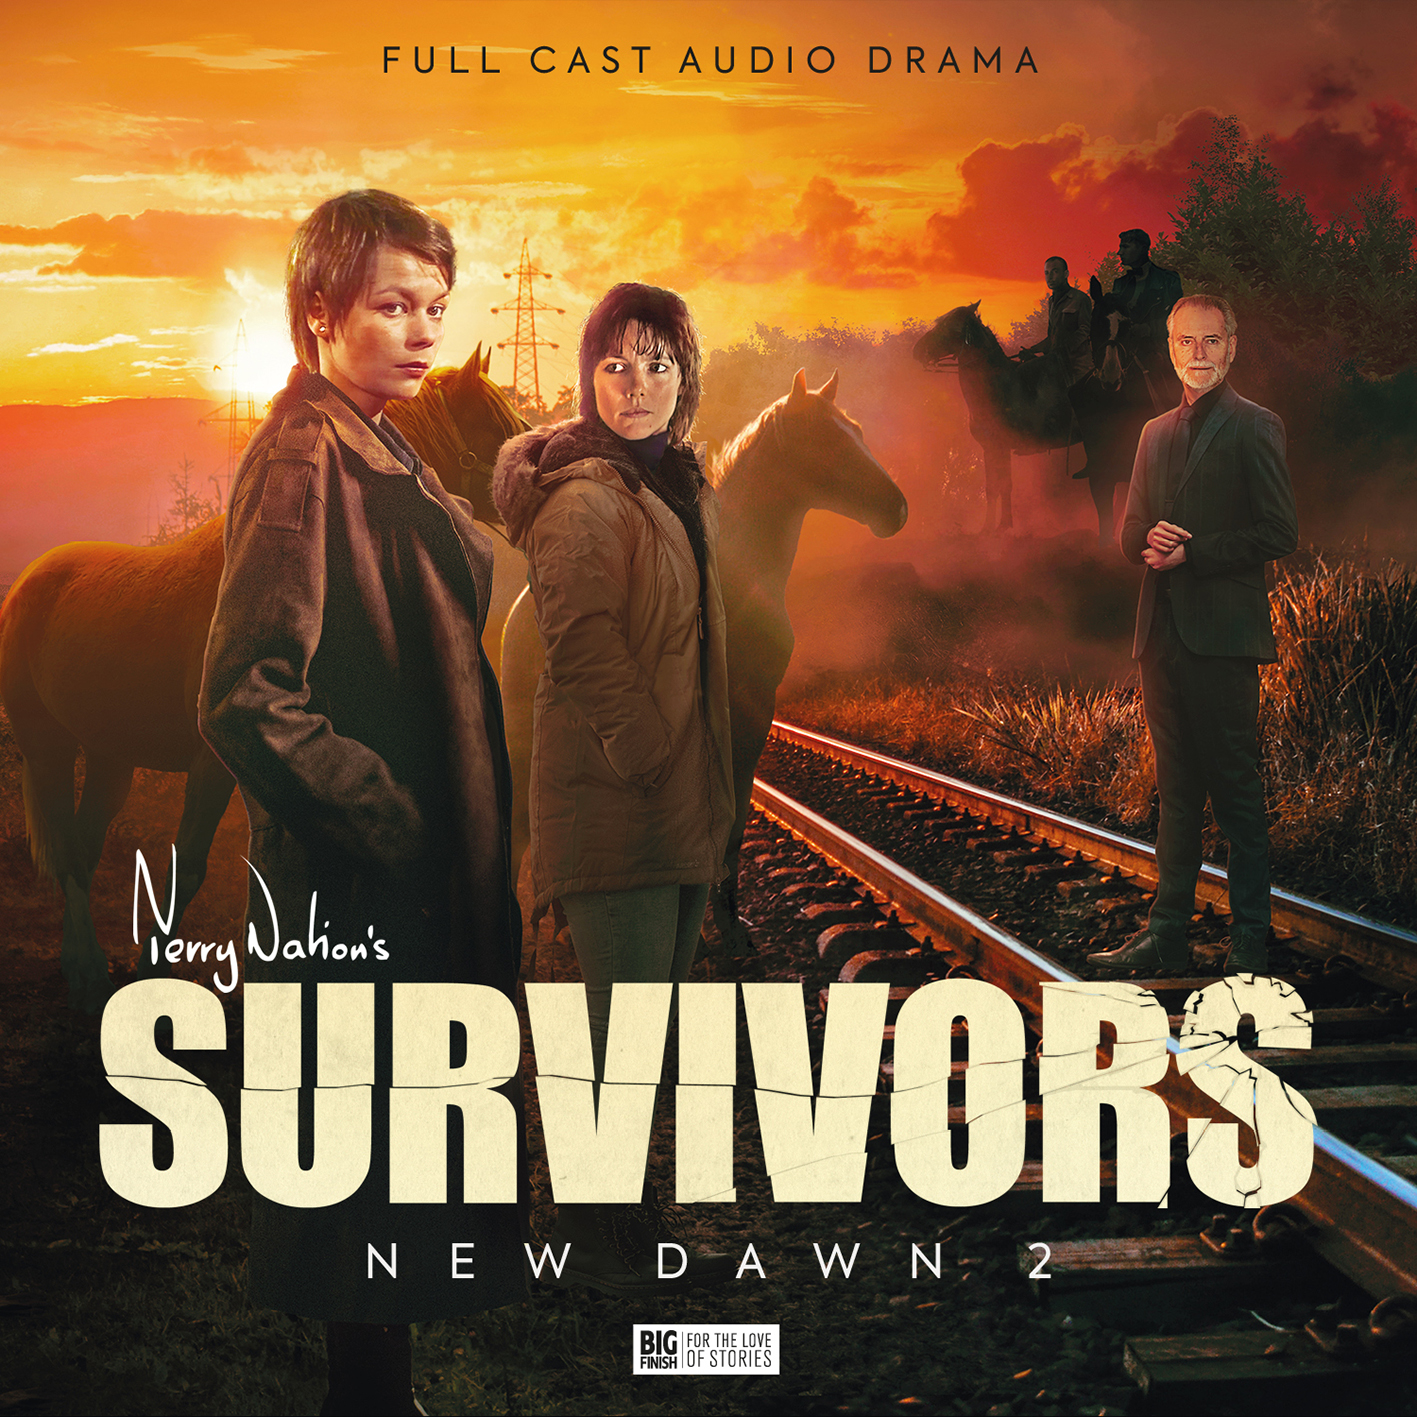 Thumbnail of the cover illustration for Big Finish's Survivors New Dawn 2